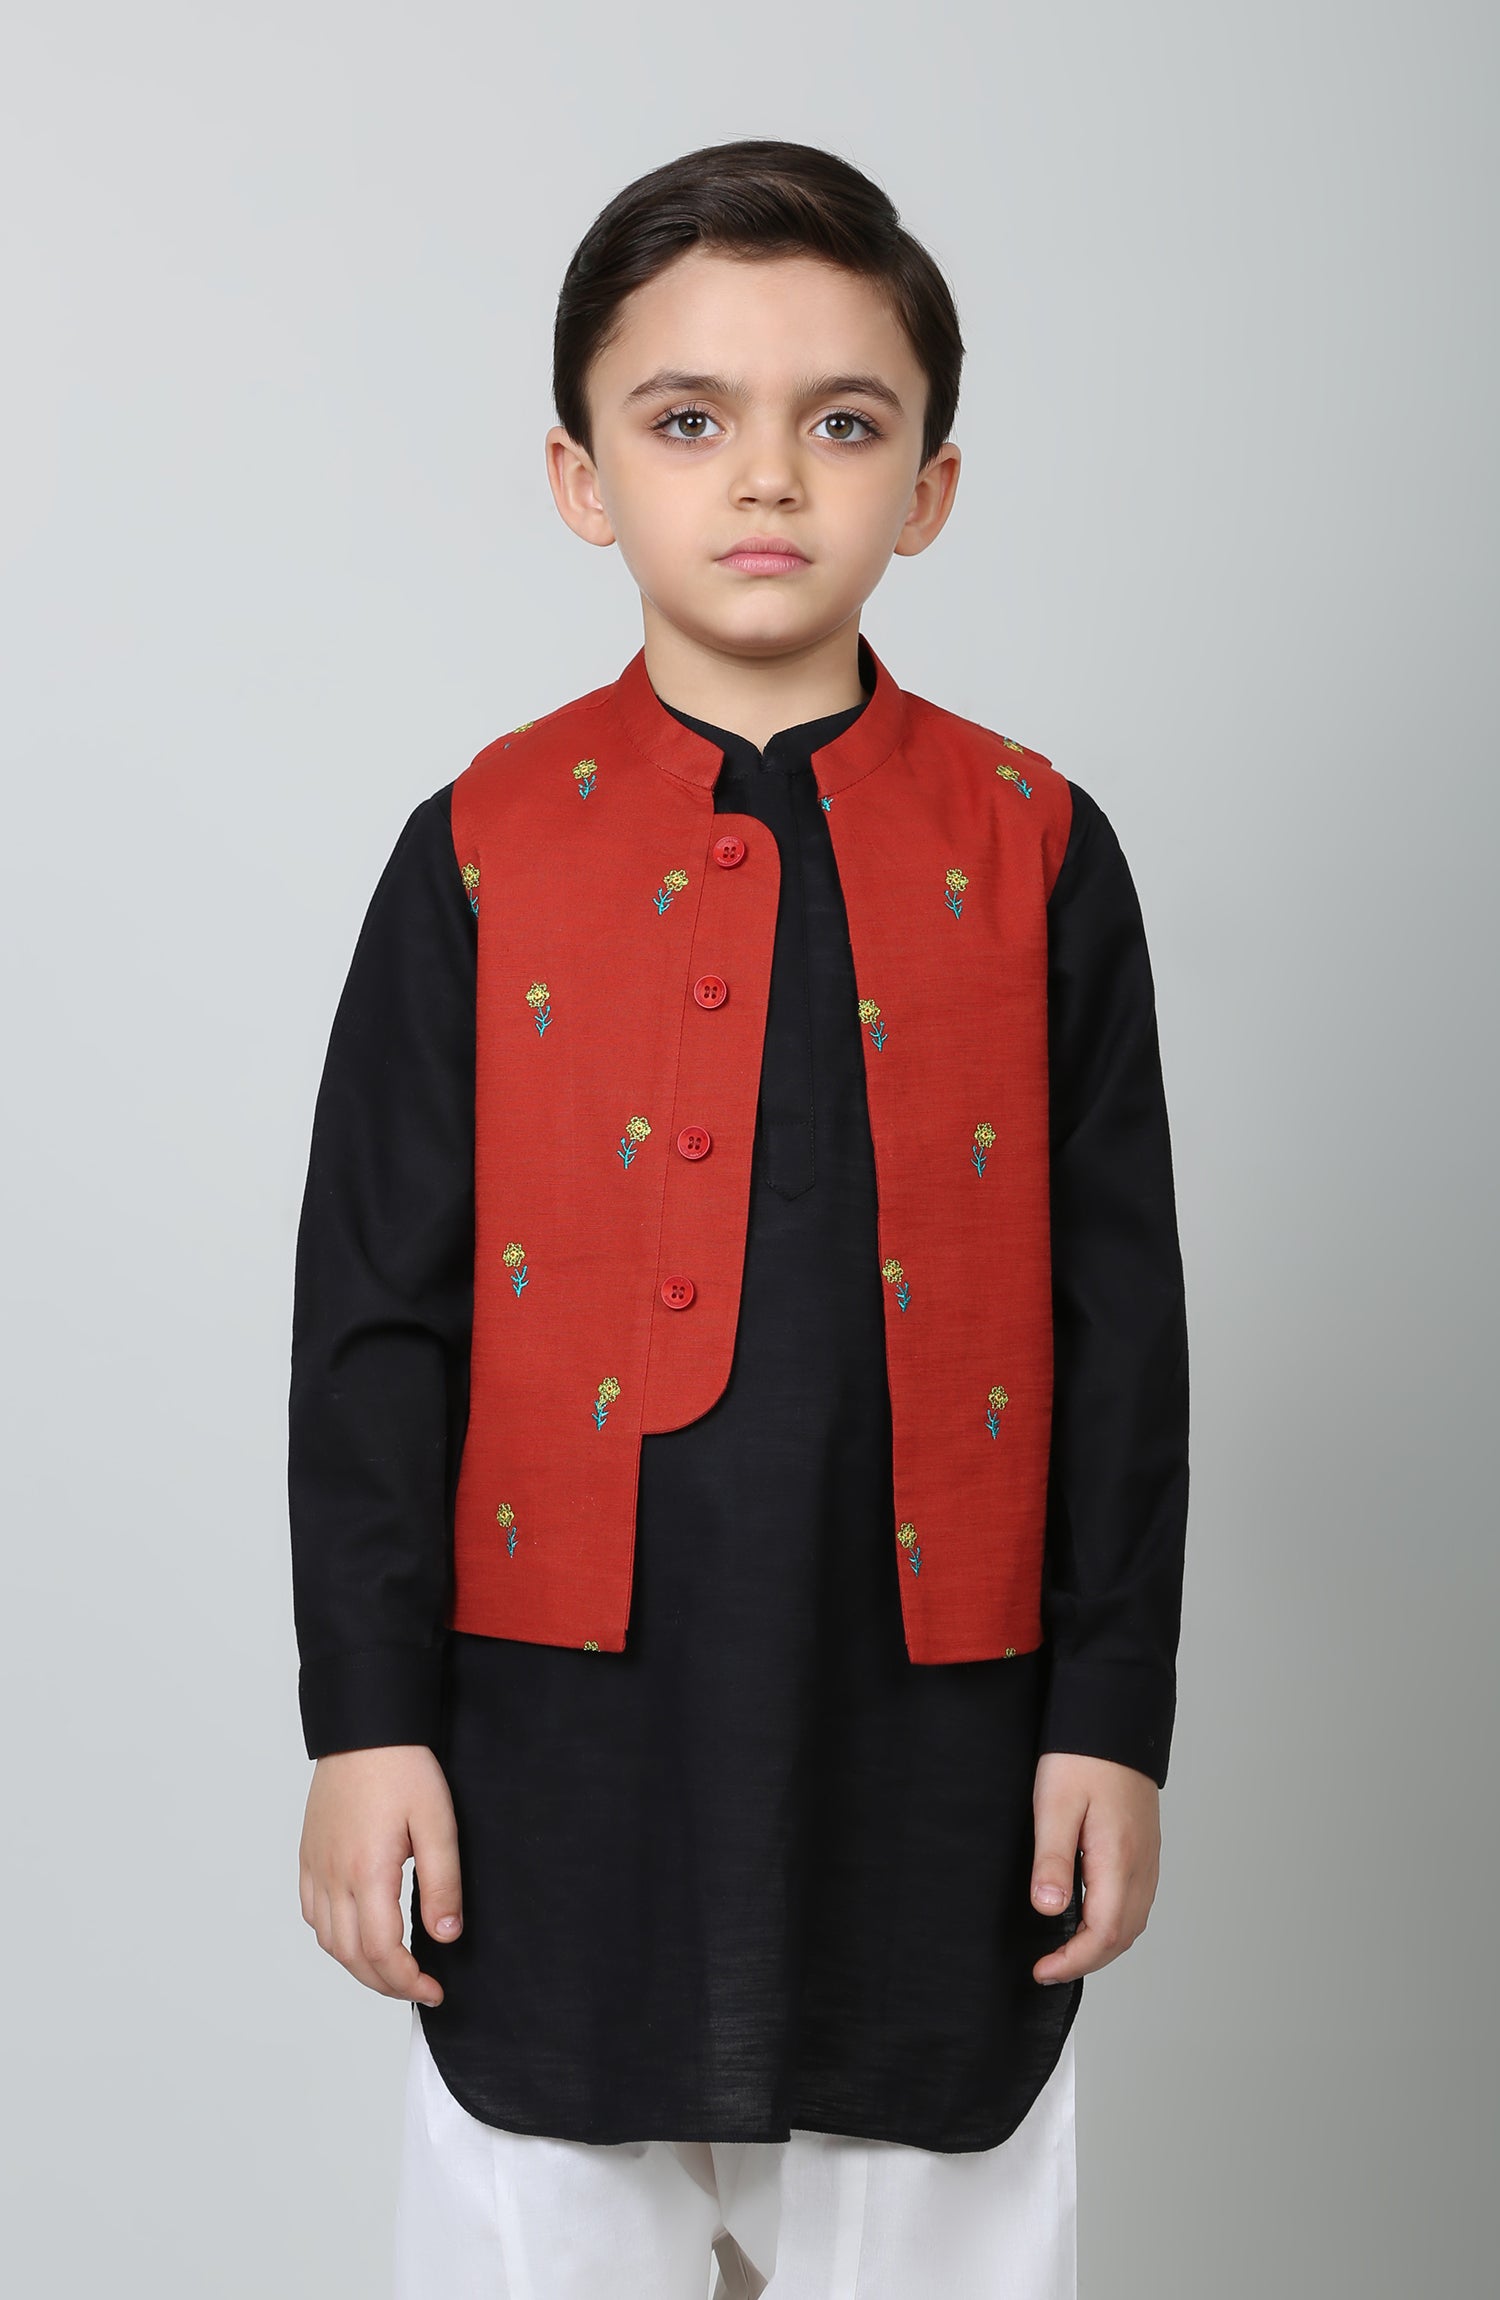 EMBROIDERED INFANT WAISTCOAT